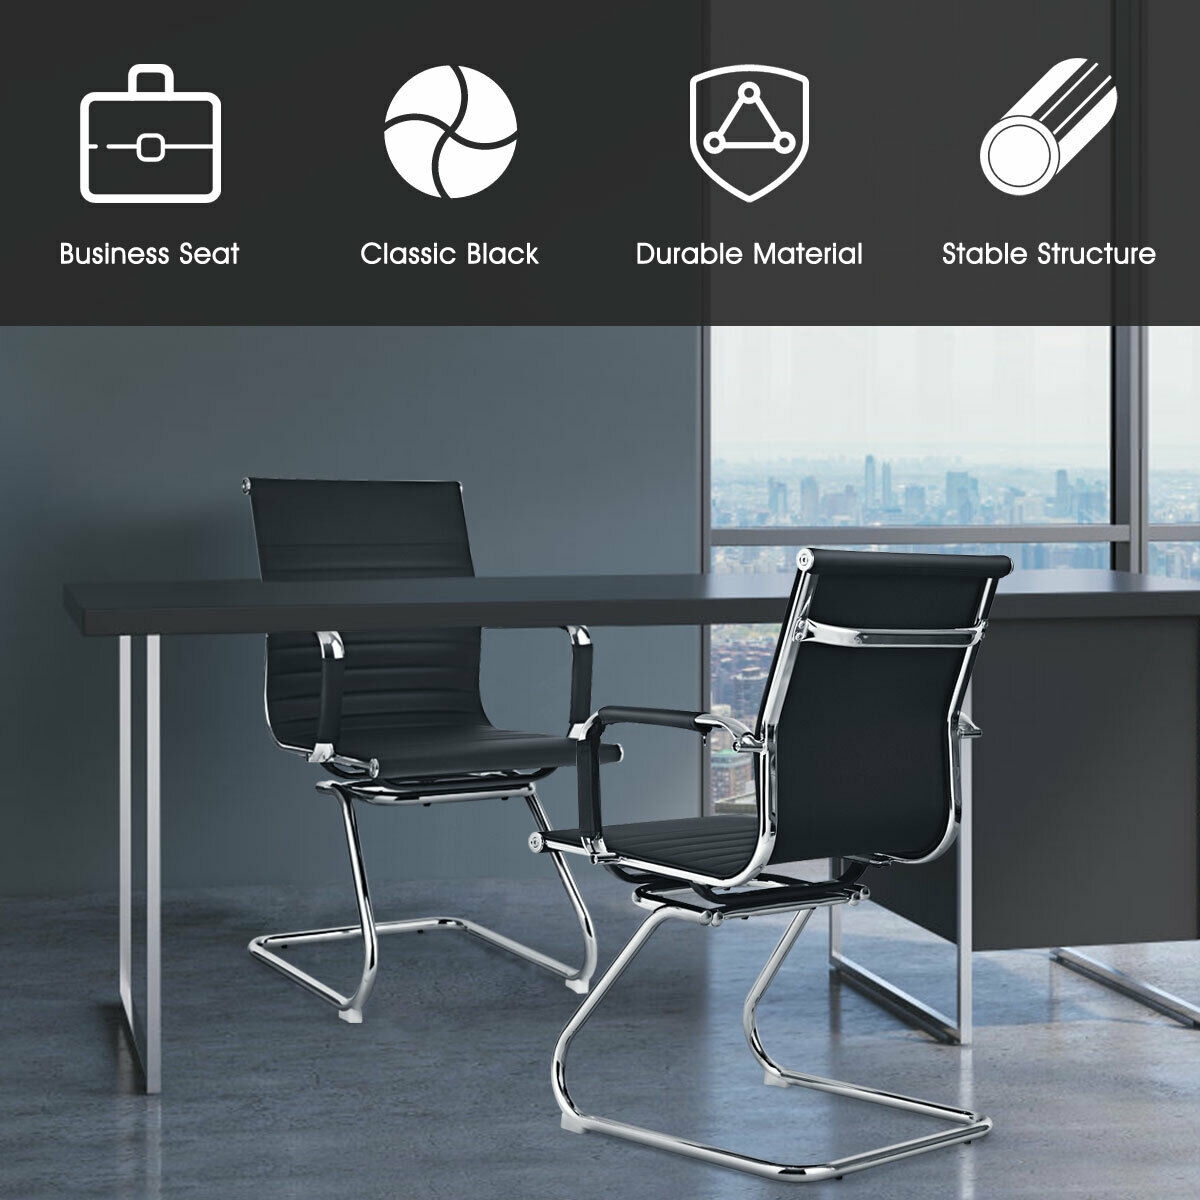 Shunzhi Mesh Reception Chair Heavy Duty Office Guest Chair with Lumbar Support Sled Base and Ergonomic Back with Armrest for Visitors/Meeting Groups/Reception/Conference Room Black 1 pcs 